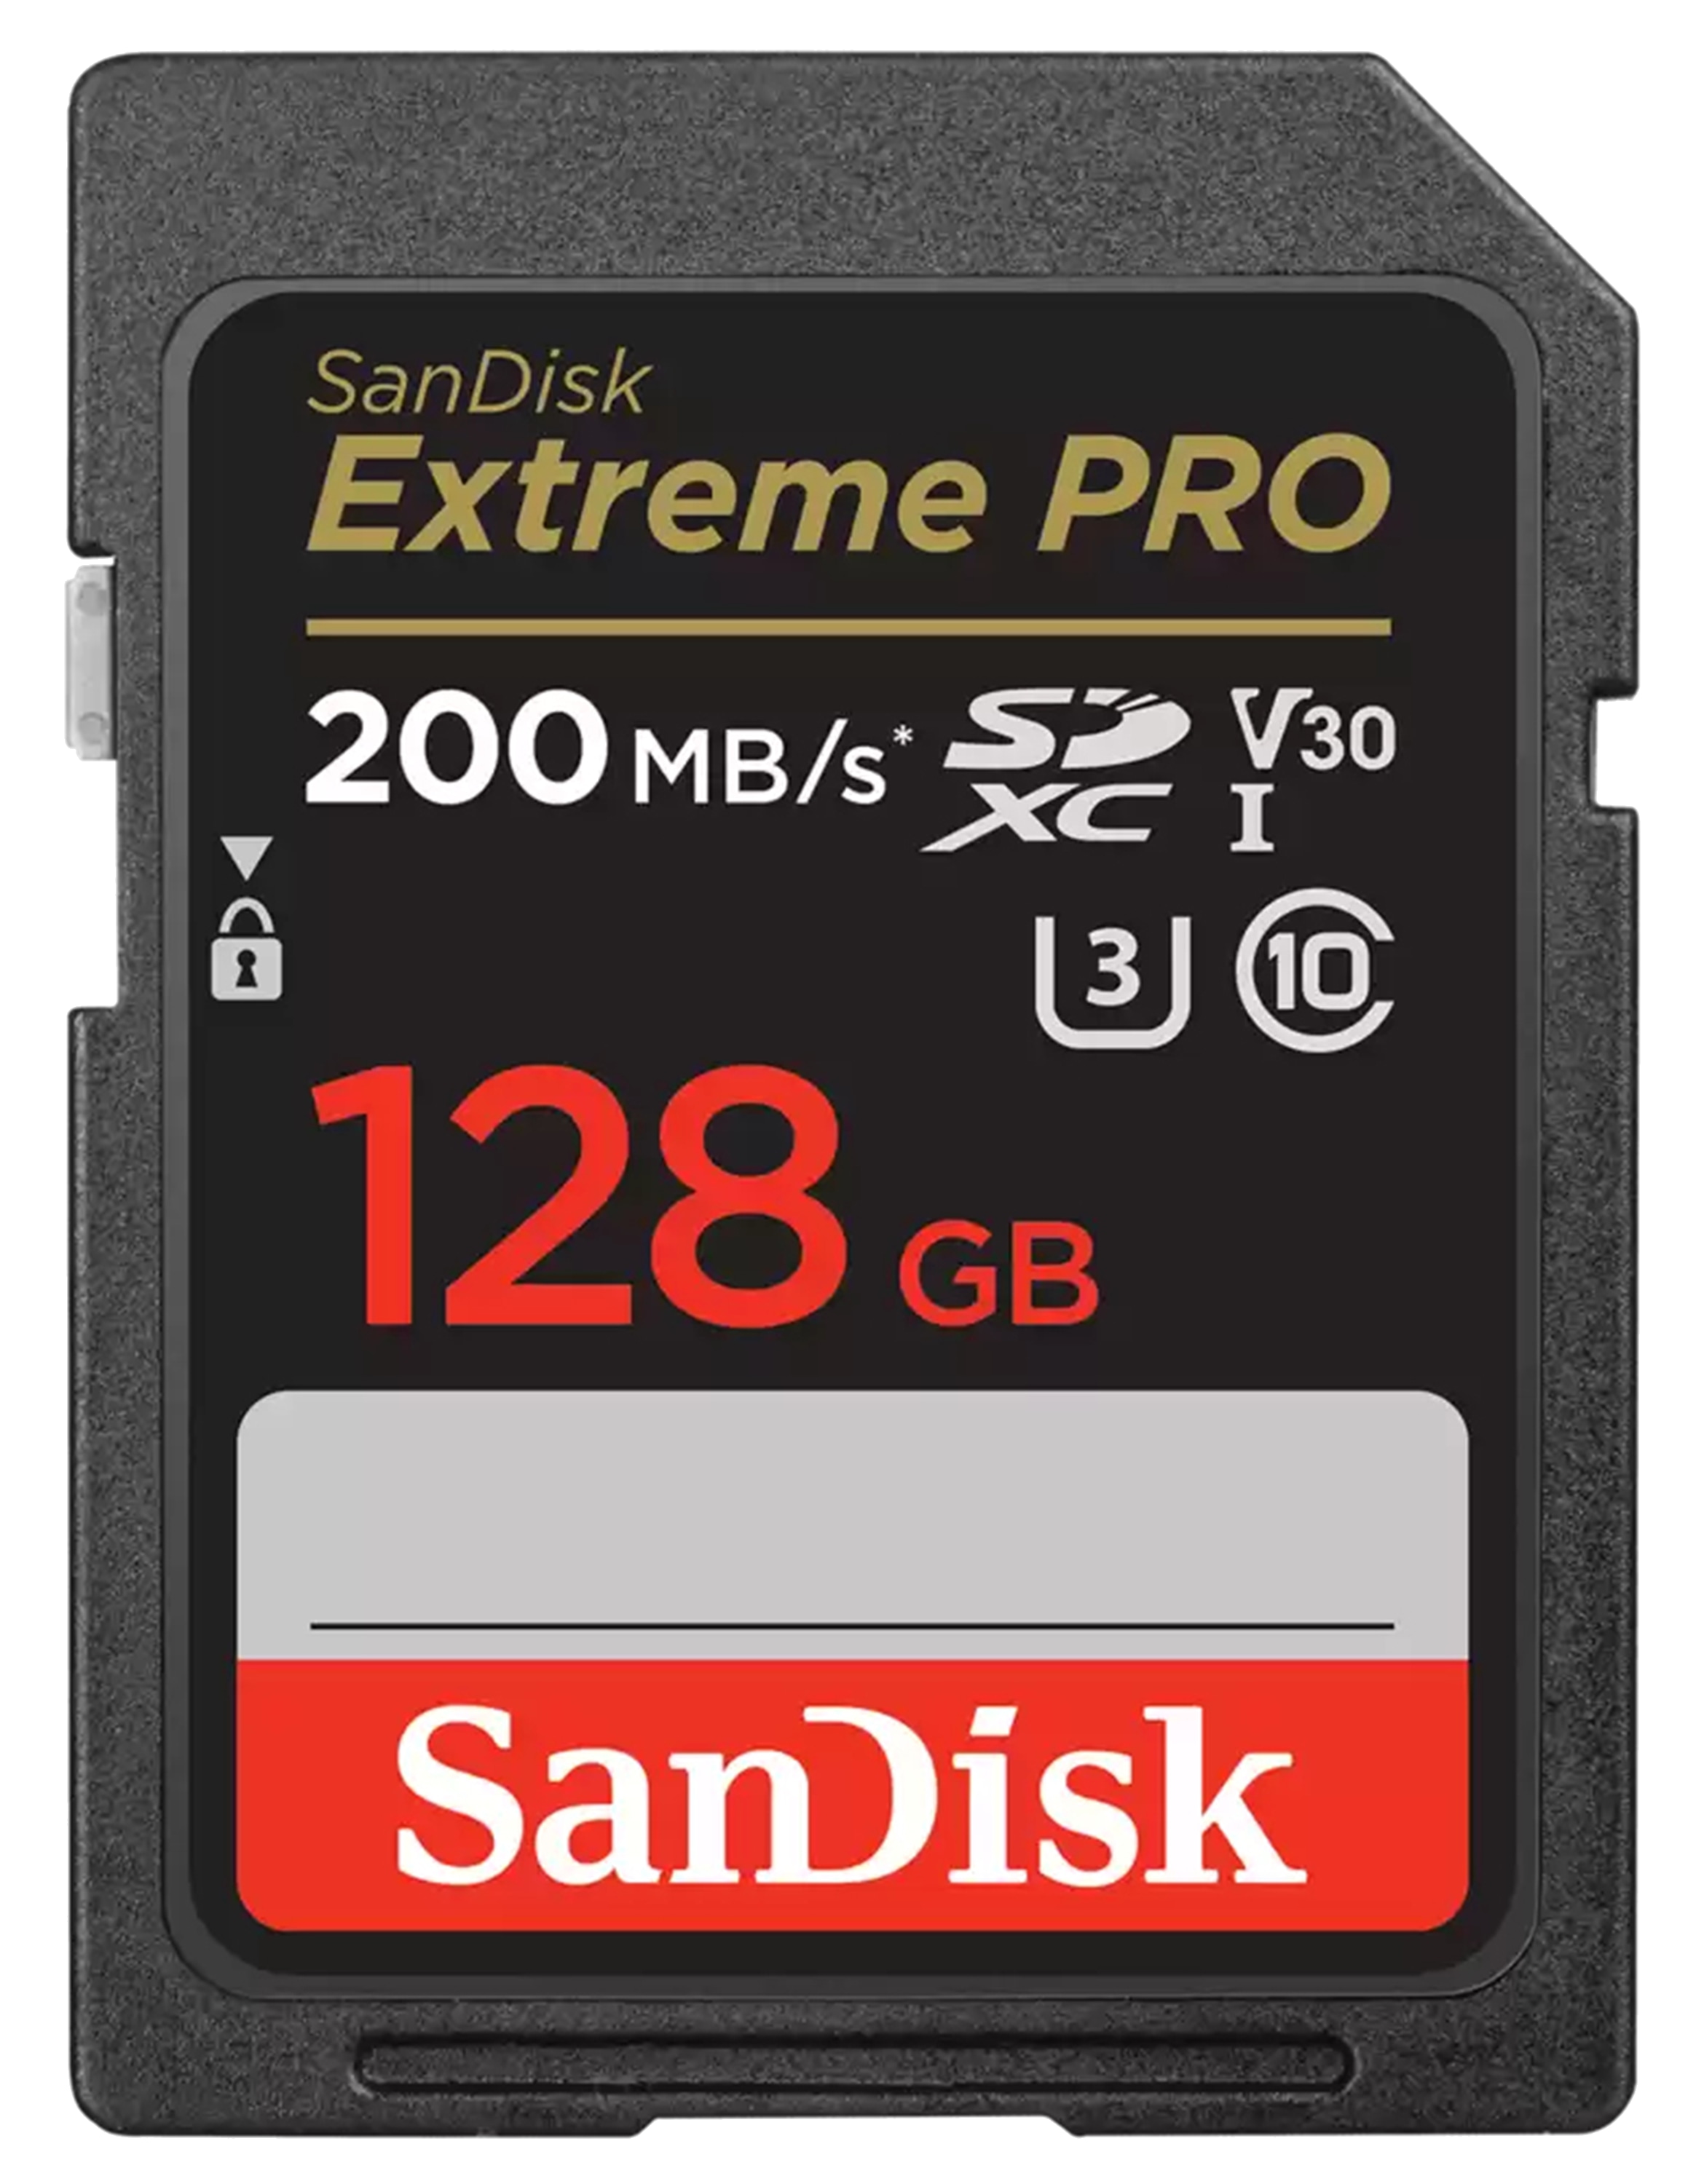 SANDISK SD-Card Extreme Pro 128GB